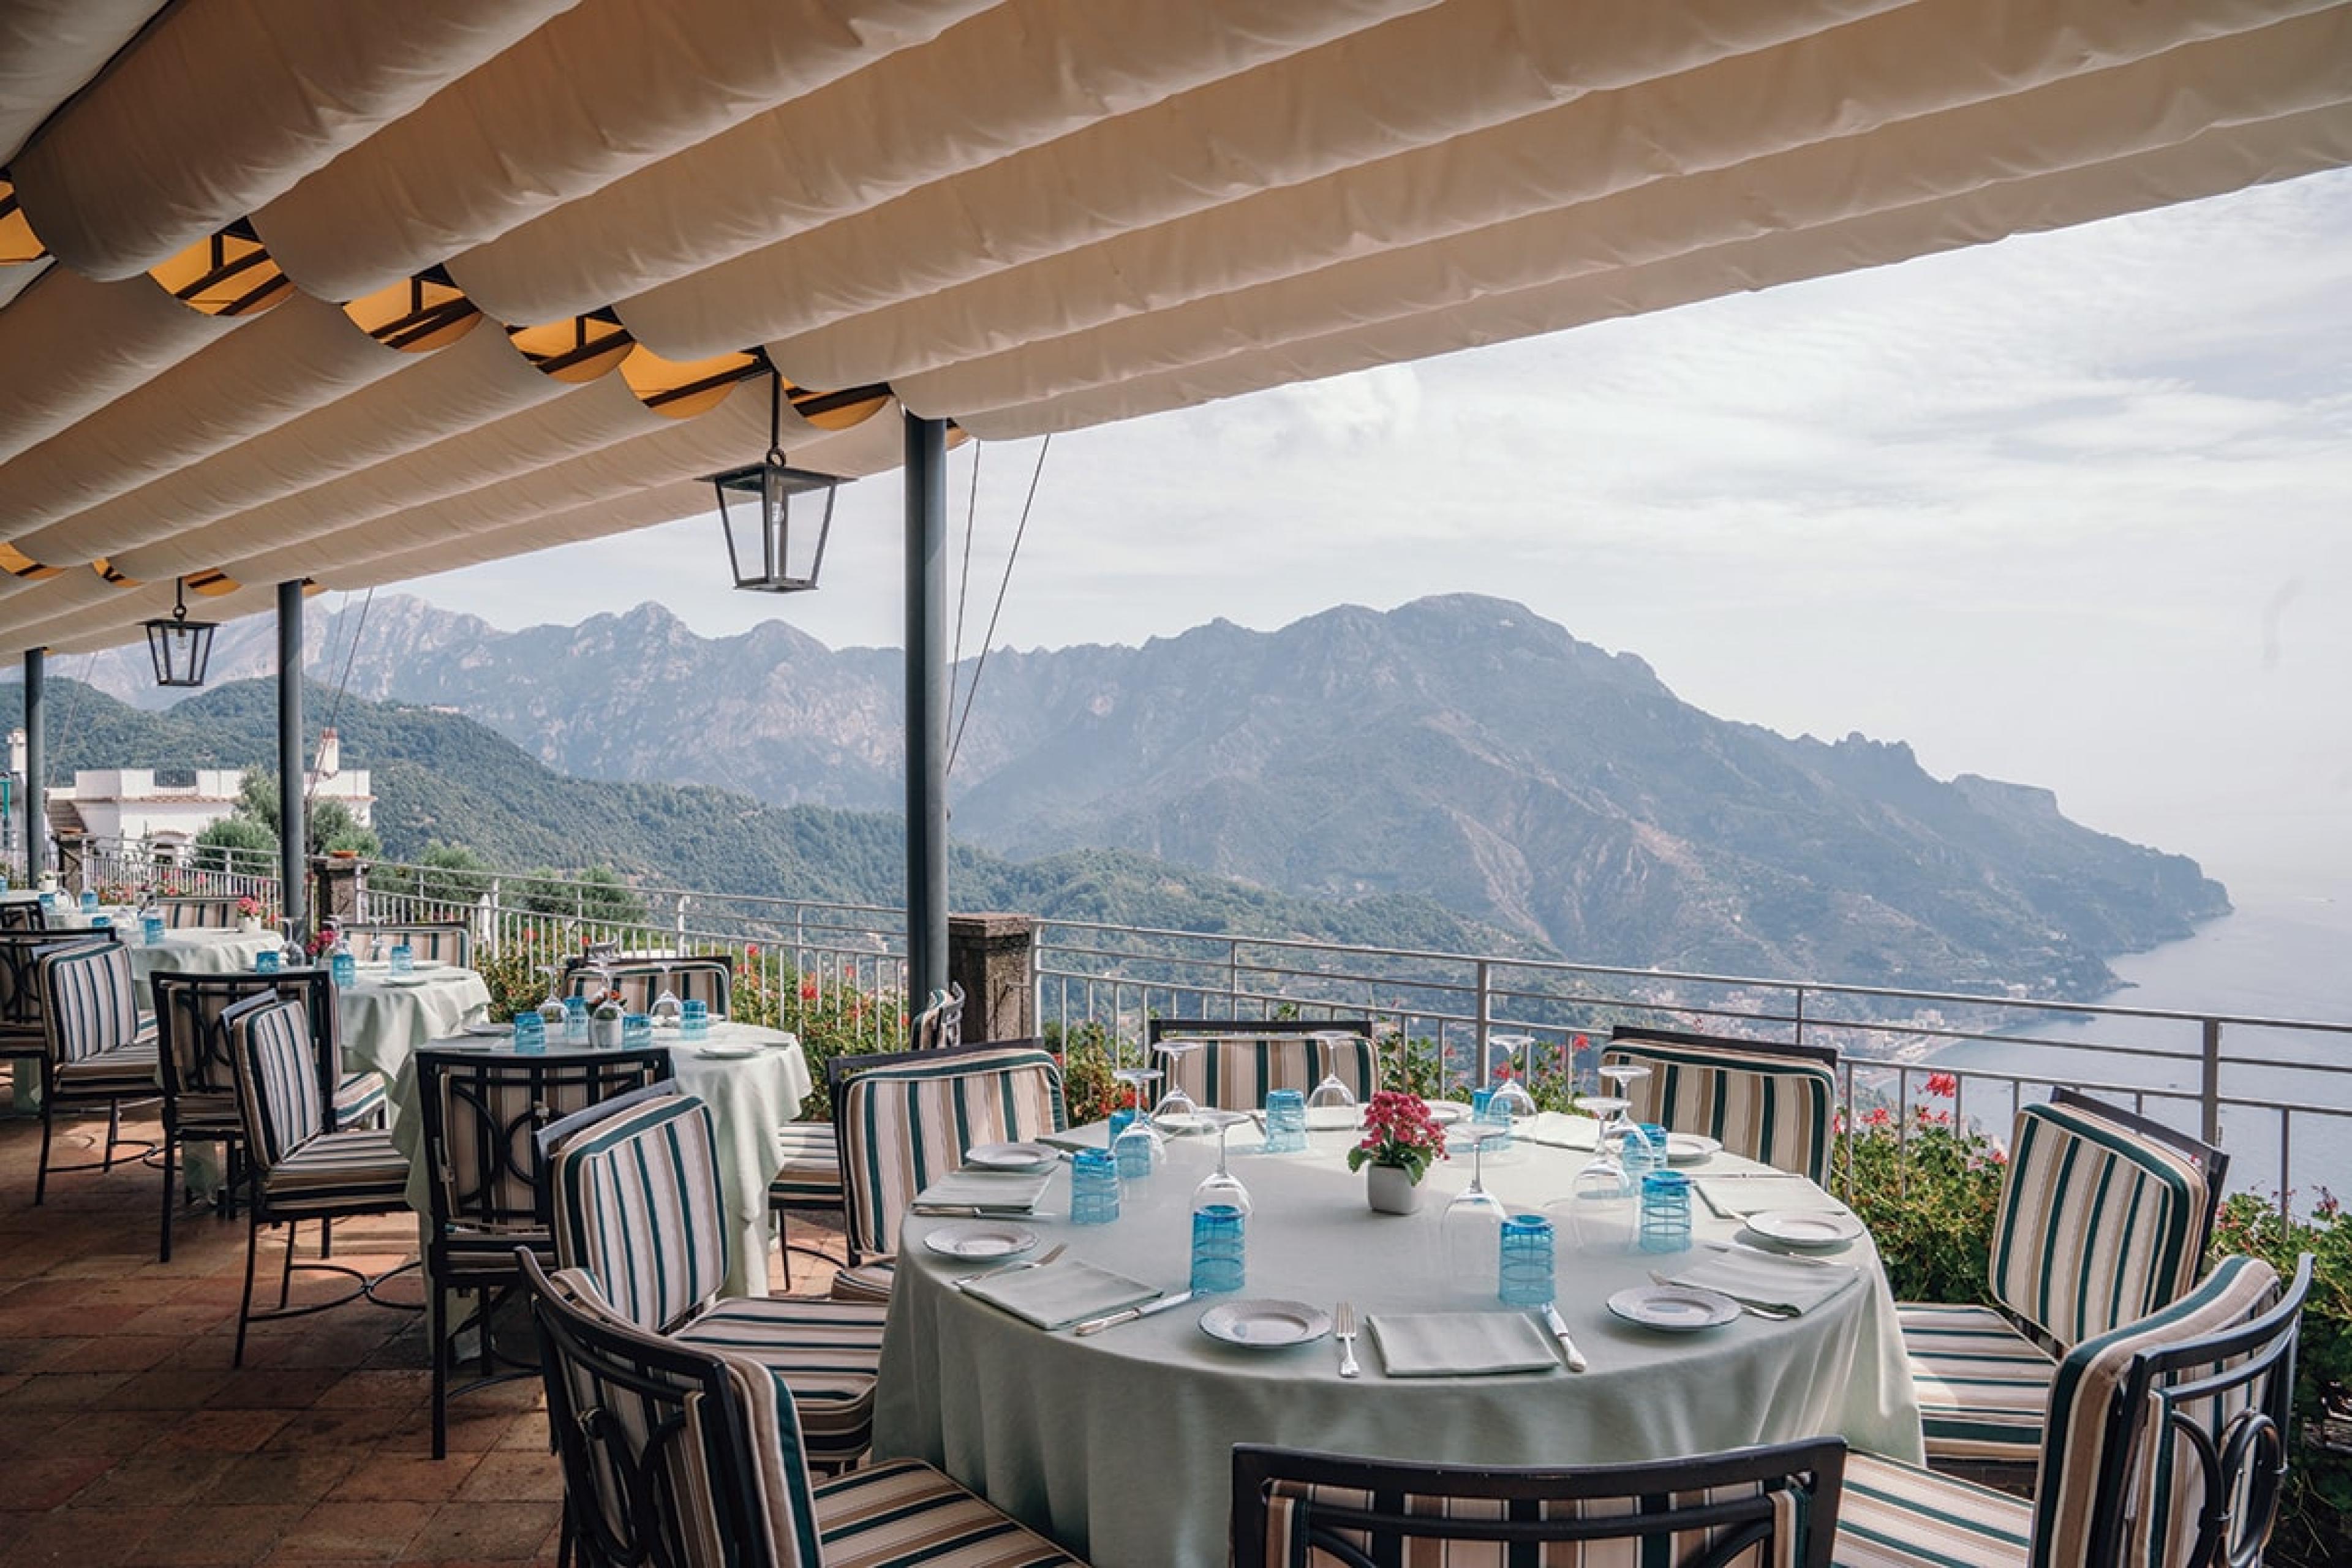 terrace with table with white tablecloth and blue water glasses overlooking amalfi coast with its hills leading down to the sea